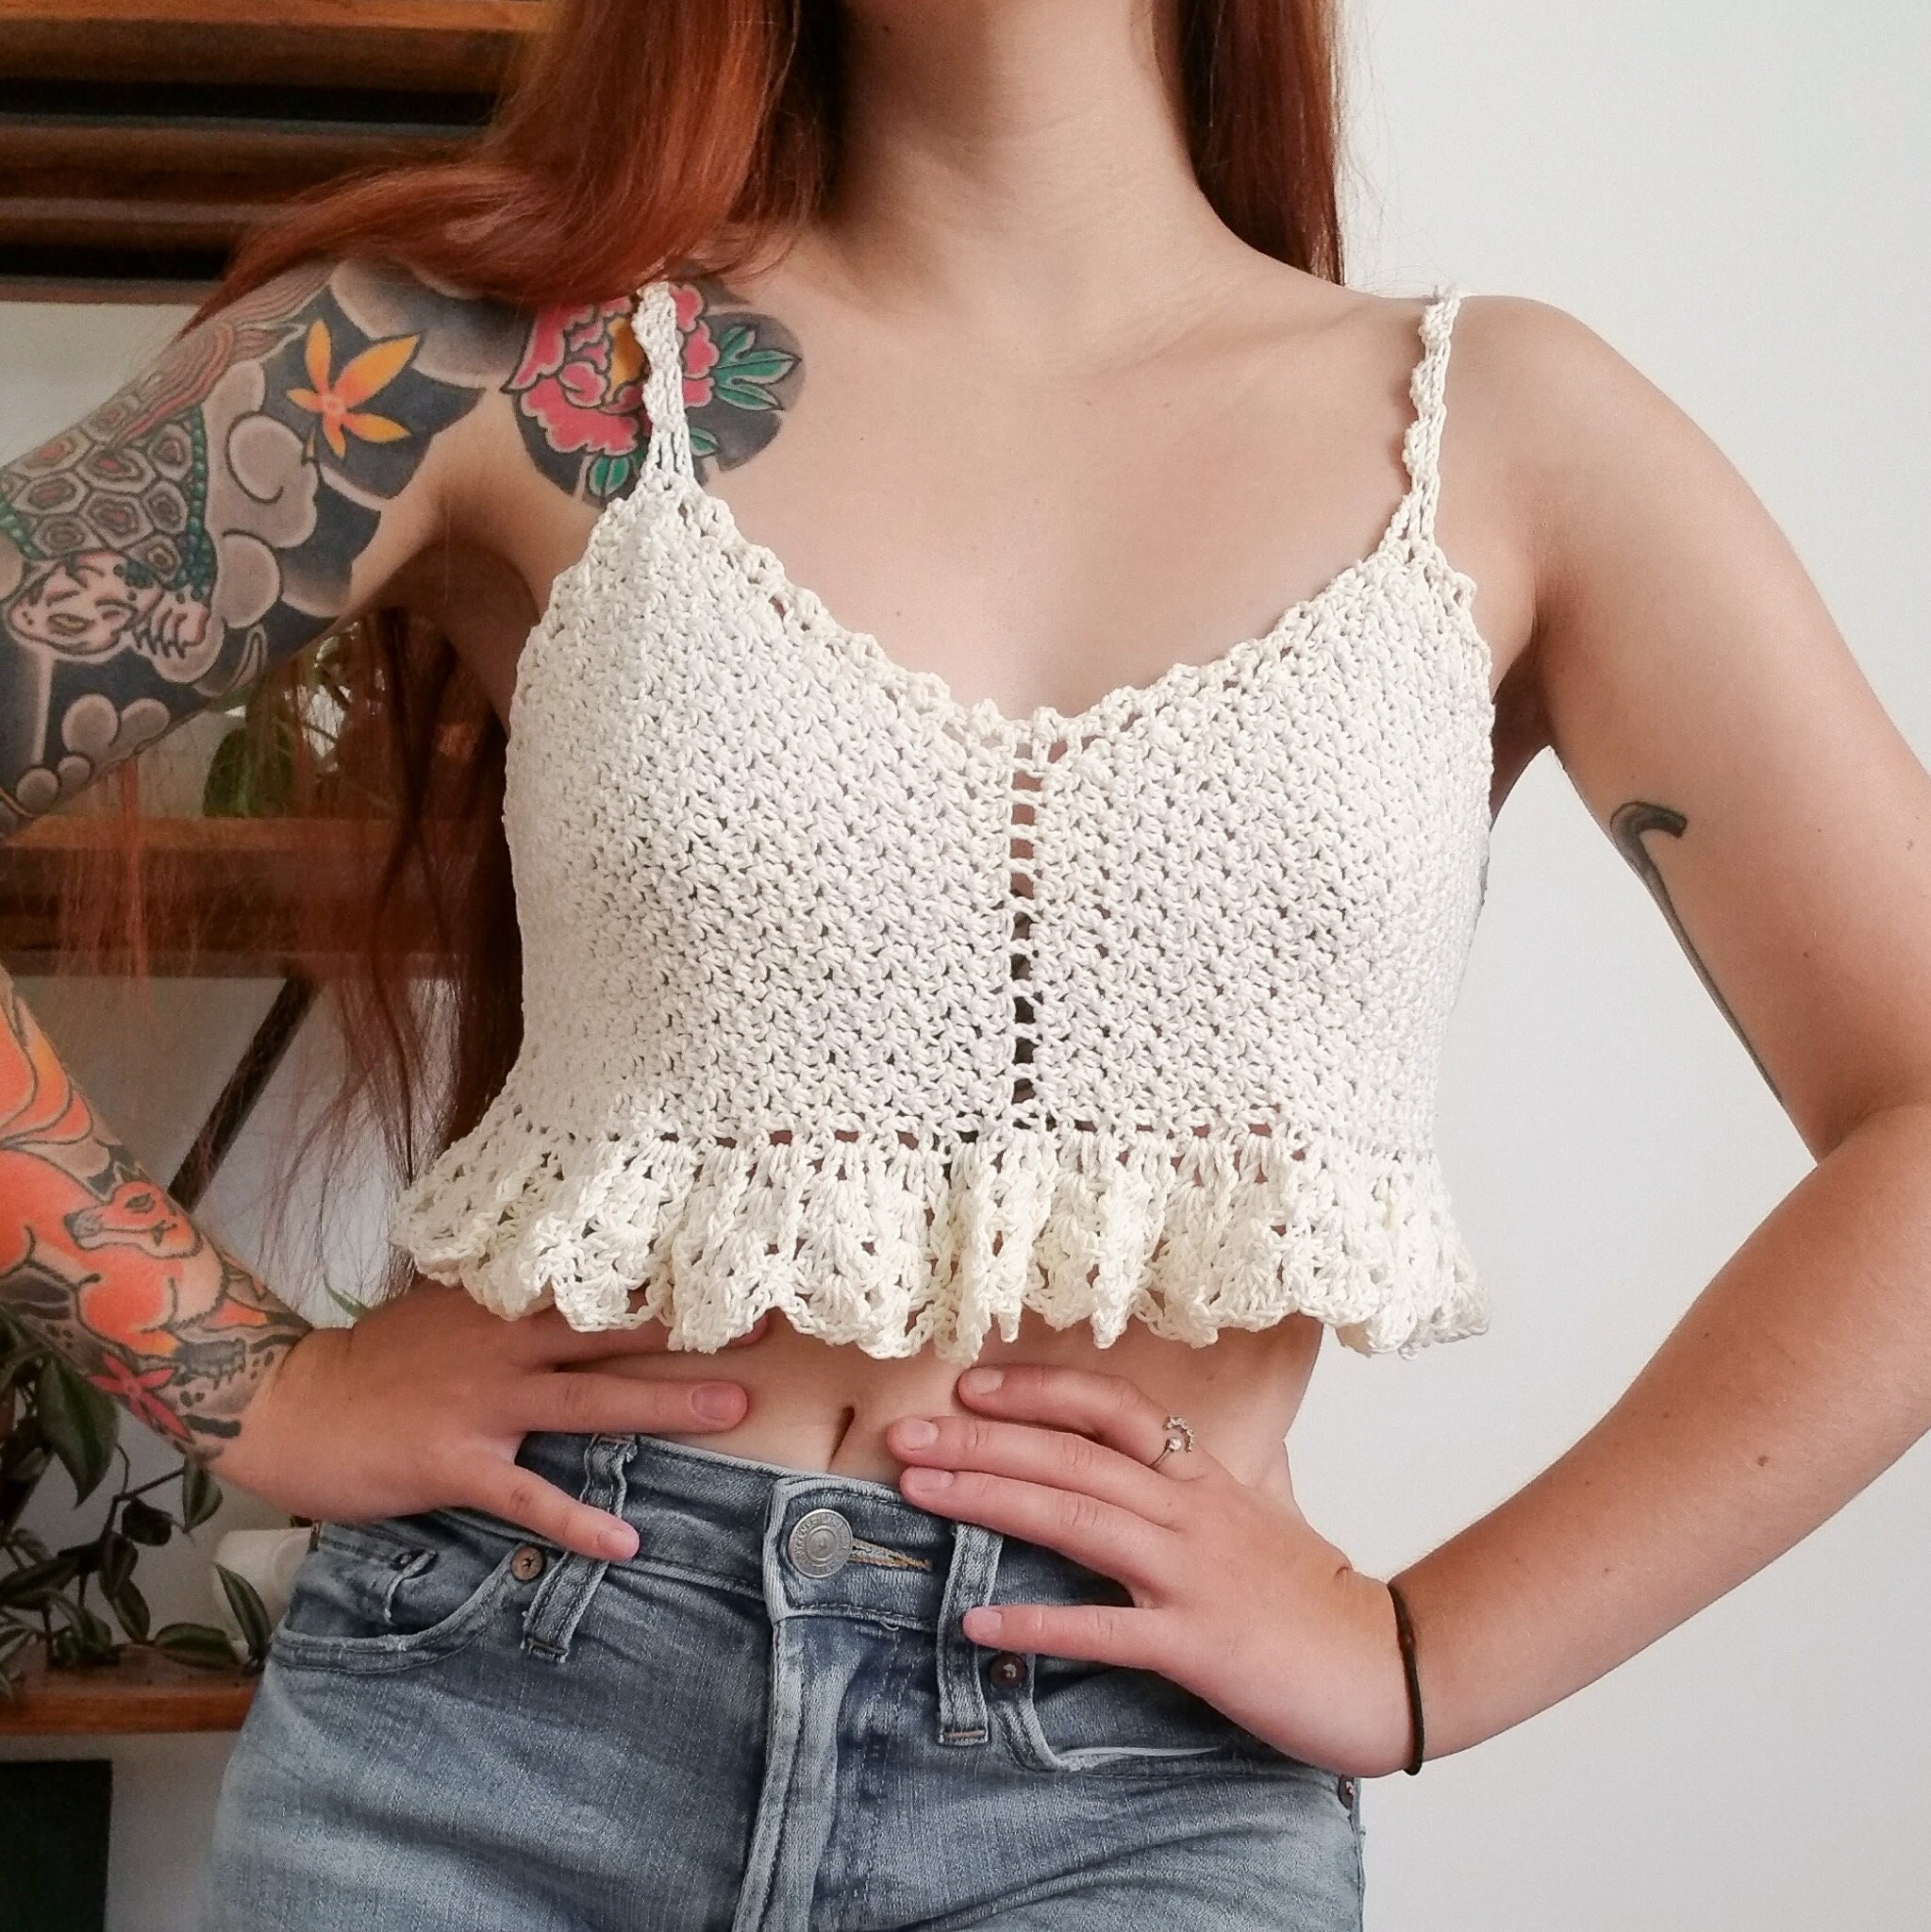 Hands using a needle to weave in ends of a crochet babydoll dress